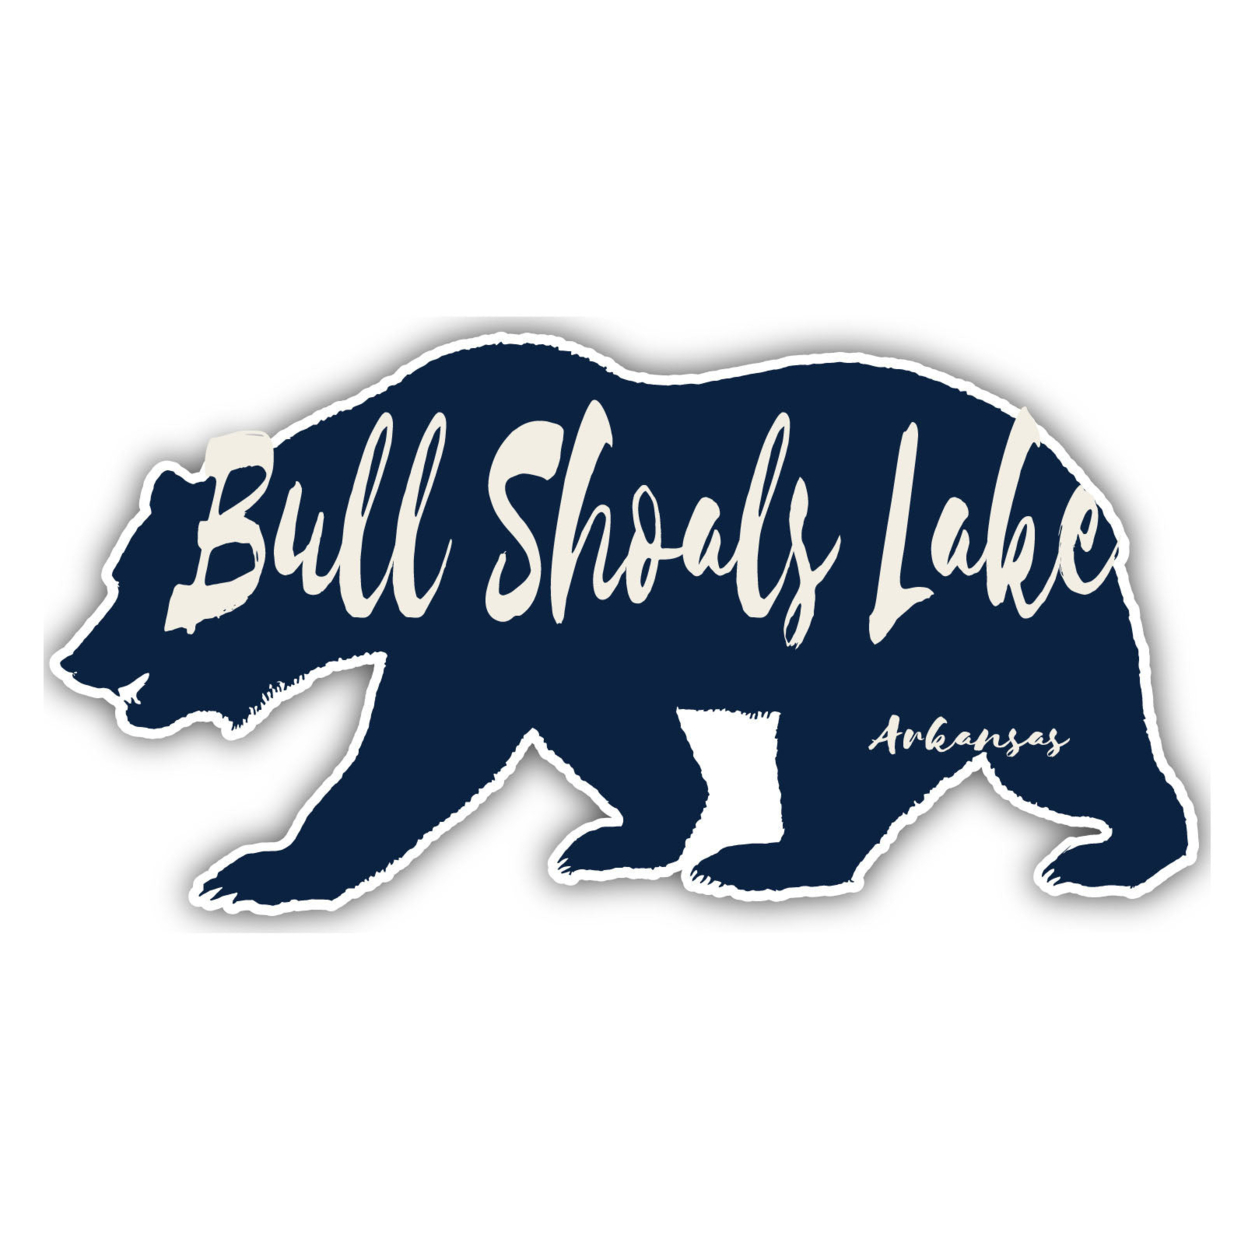 Bull Shoals Lake Arkansas Souvenir Decorative Stickers (Choose Theme And Size) - 4-Pack, 10-Inch, Camp Life